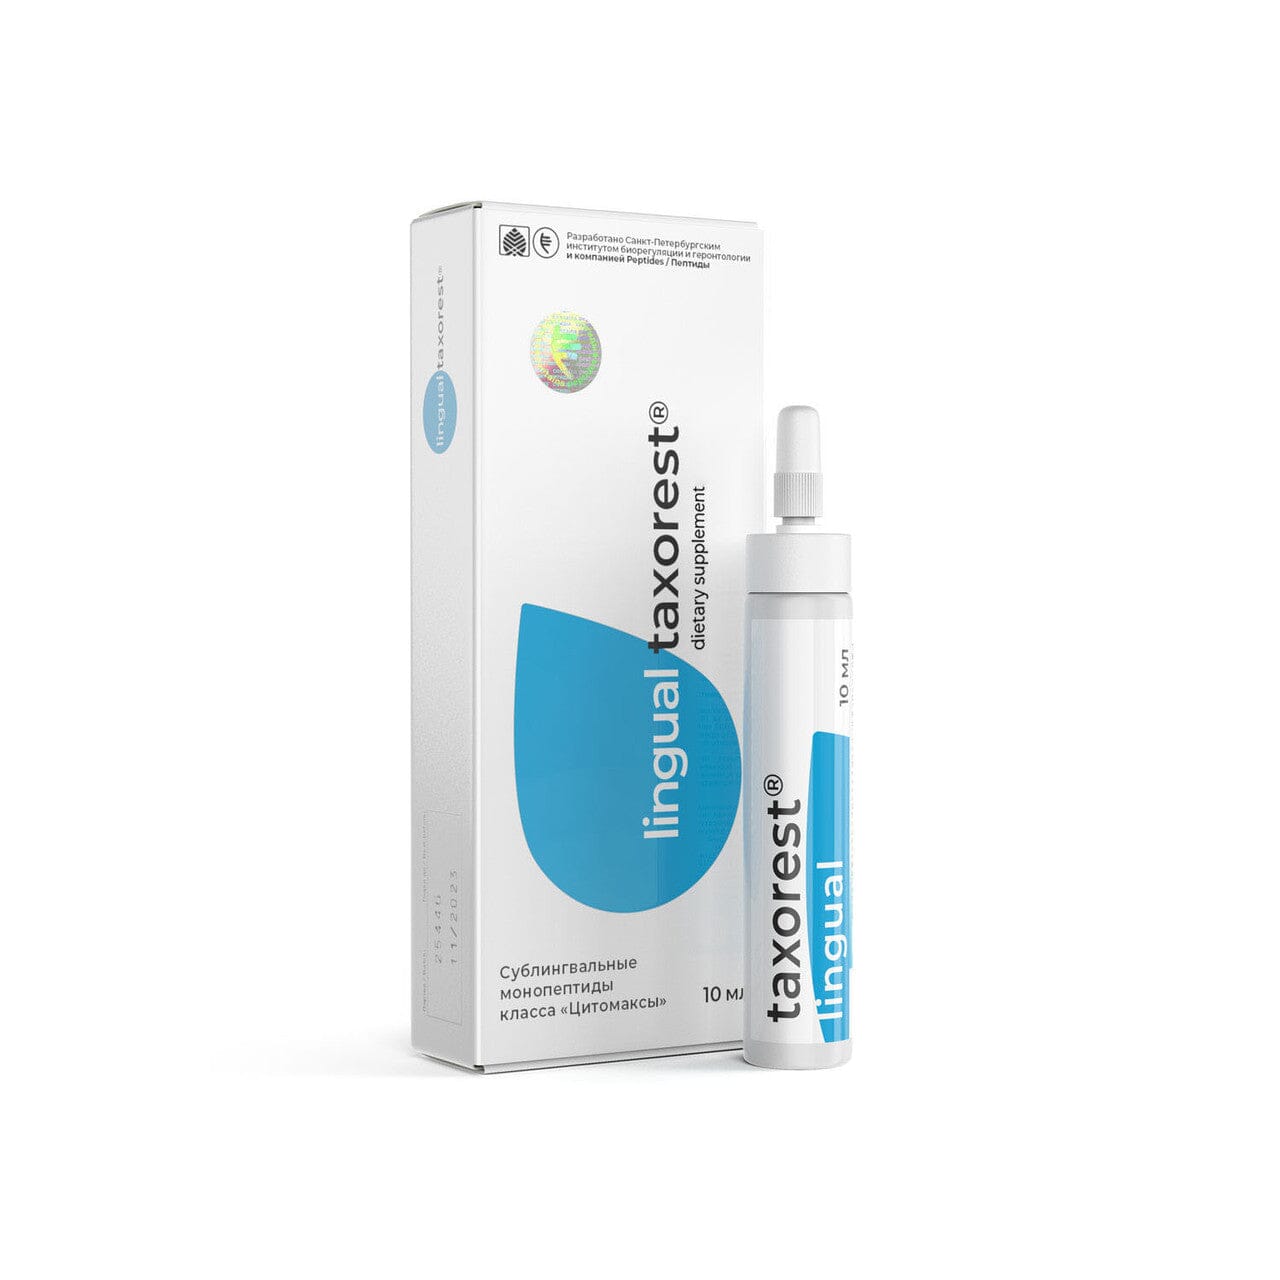 A-19 Taxorest lingual - natural sublingual lungs peptide complex